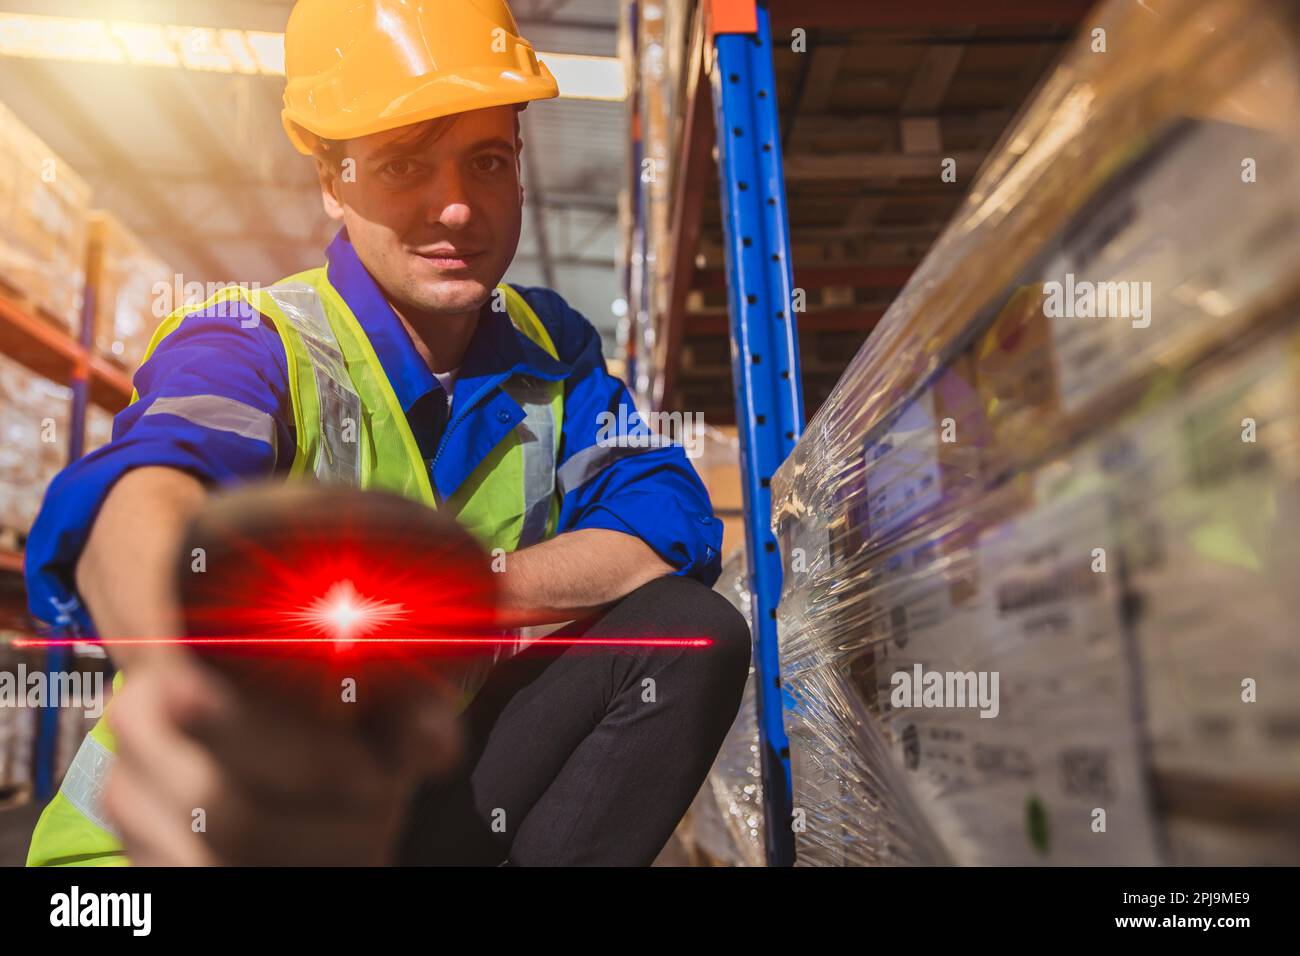 Inventory staff worker with handheld red laser barcode scanner label scan goods management technology device Stock Photo